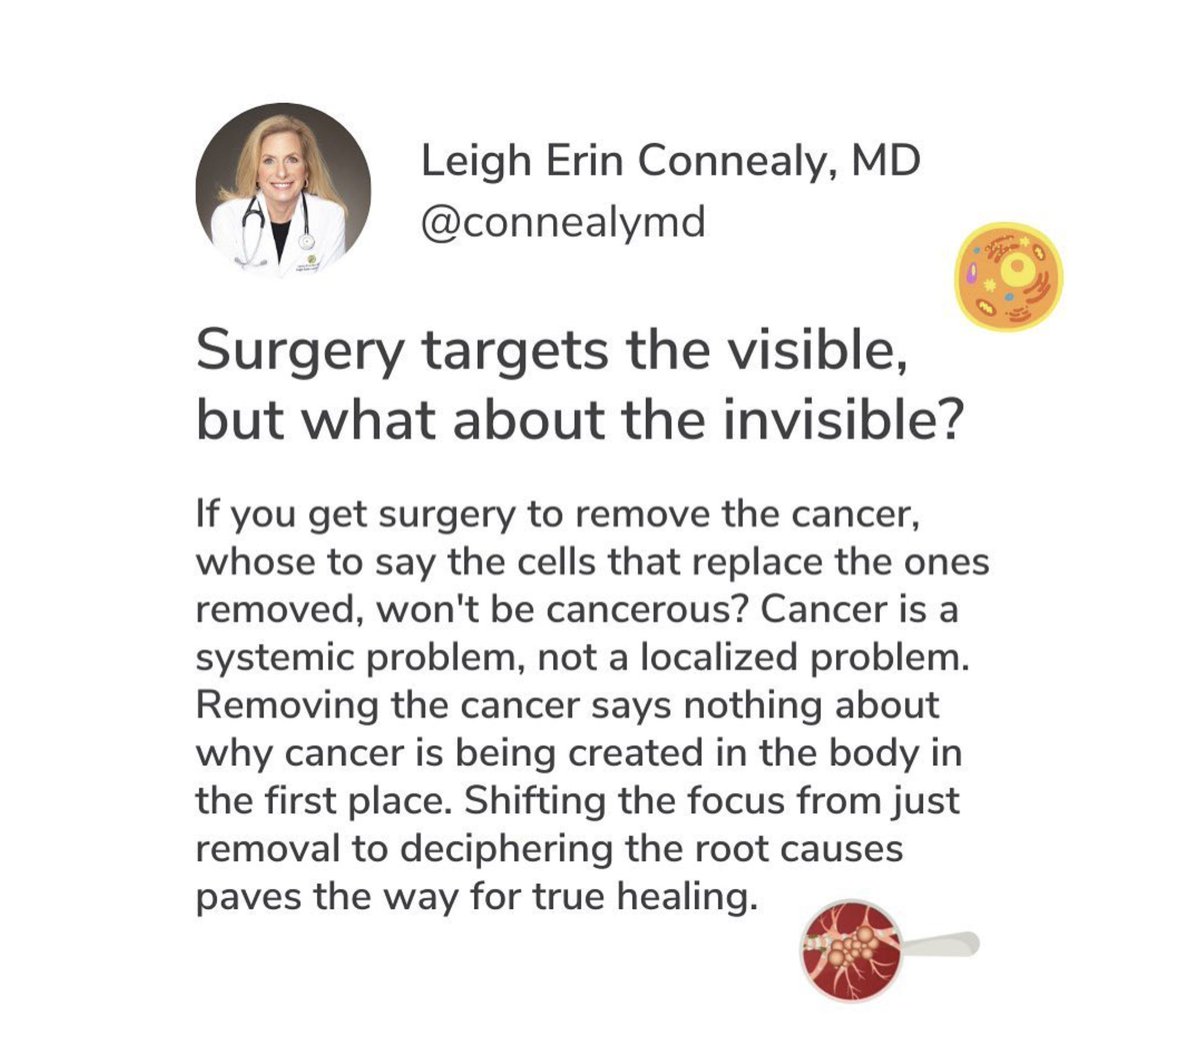 Digging Deeper into Cancer: Surgery targets the visible, but what about the invisible? Cancer's systemic nature points to a puzzle beyond the surface. Shifting our focus from just removal to understanding the origin is the key to solving this intricate riddle. 🧩🌱#CancerMystery